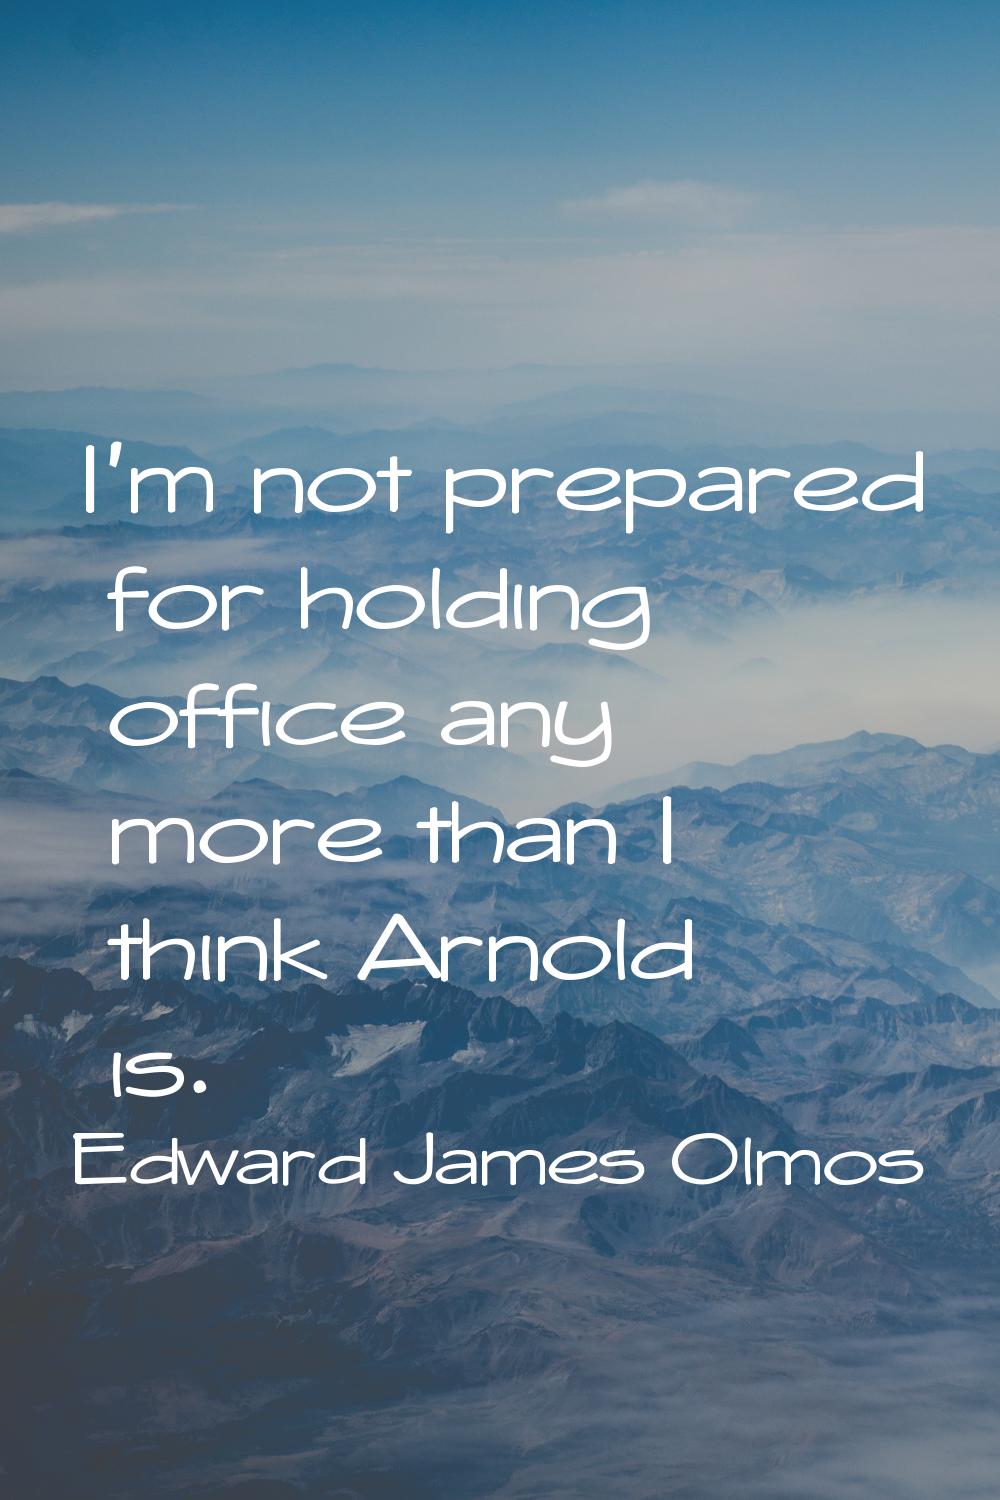 I'm not prepared for holding office any more than I think Arnold is.